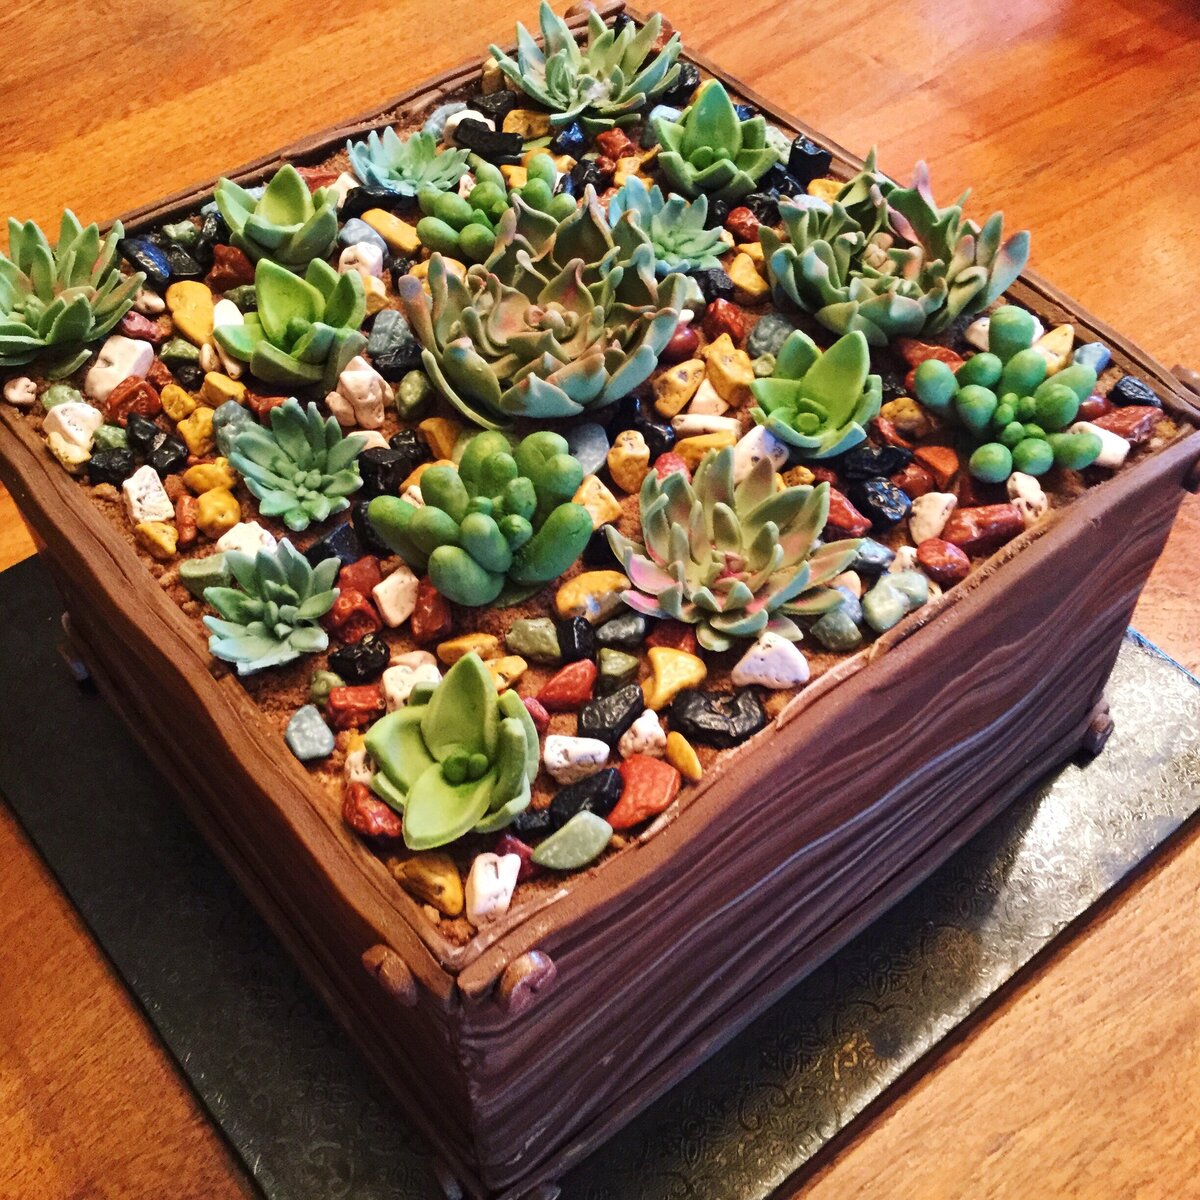 Woodgrain square cake designed as a garden box filled with handcrafted fondant succulents and chocolate rocks